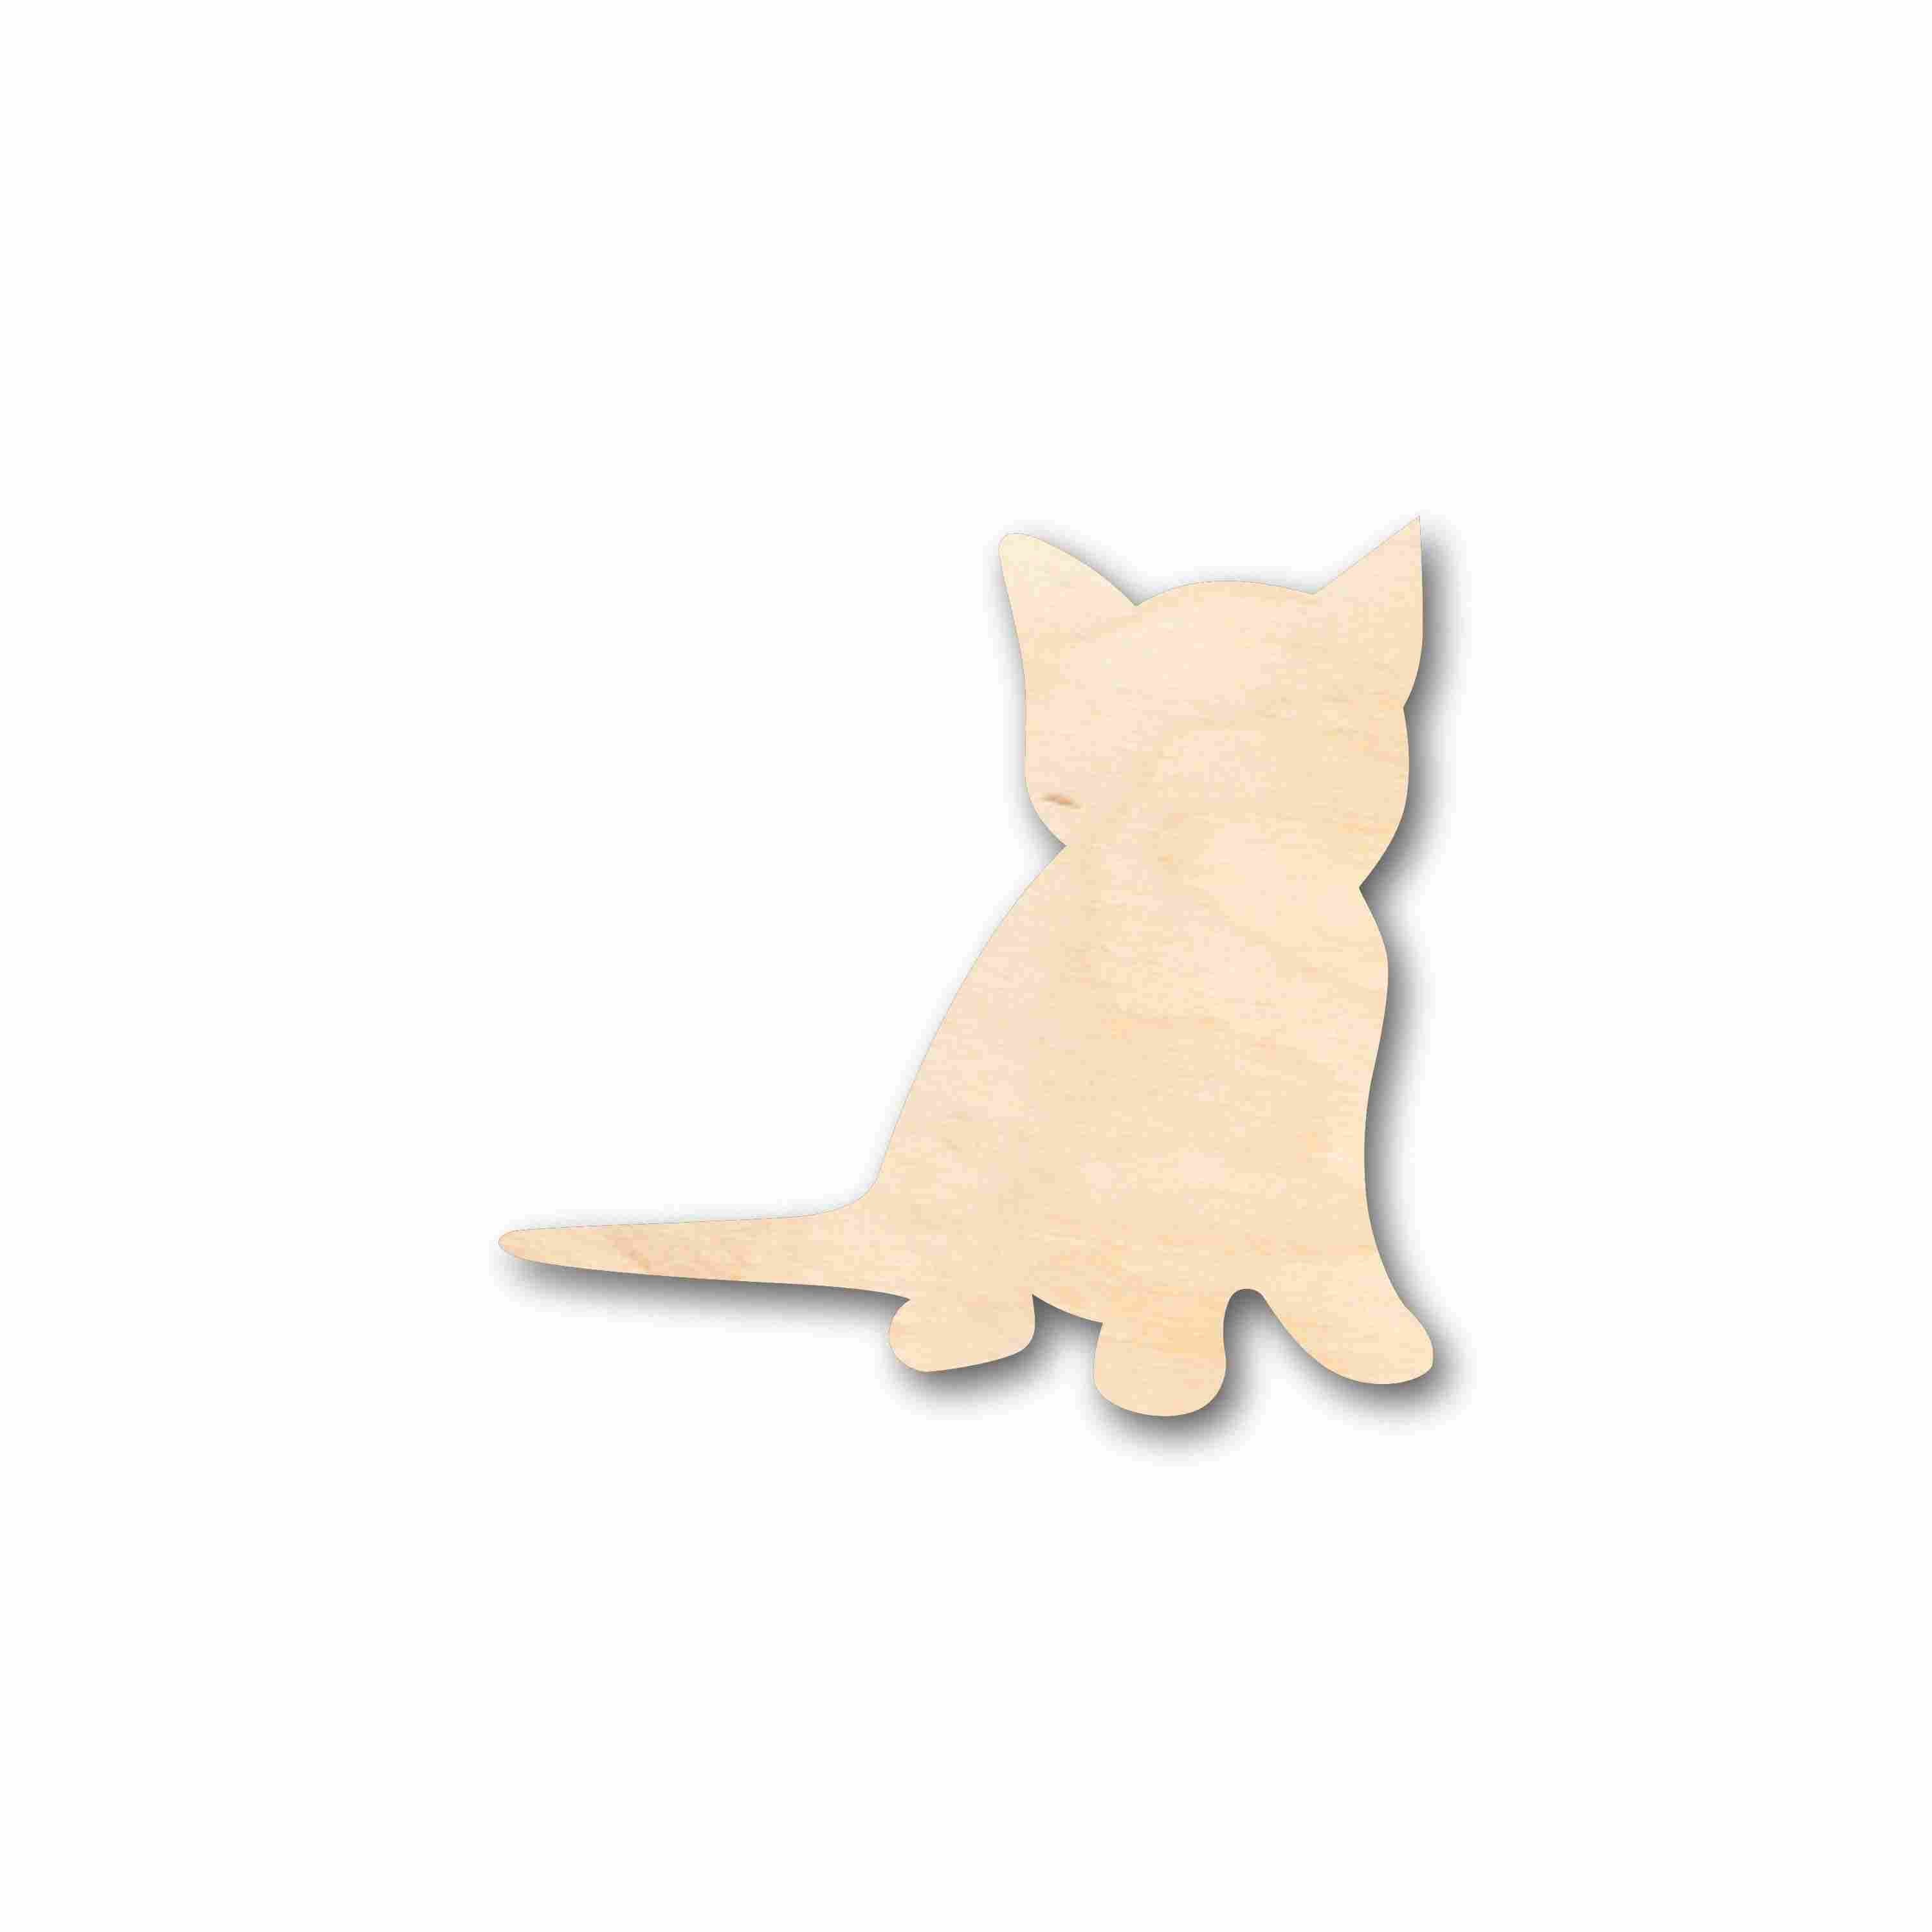 Unfinished Wood Kitten Silhouette - Craft- up to 24